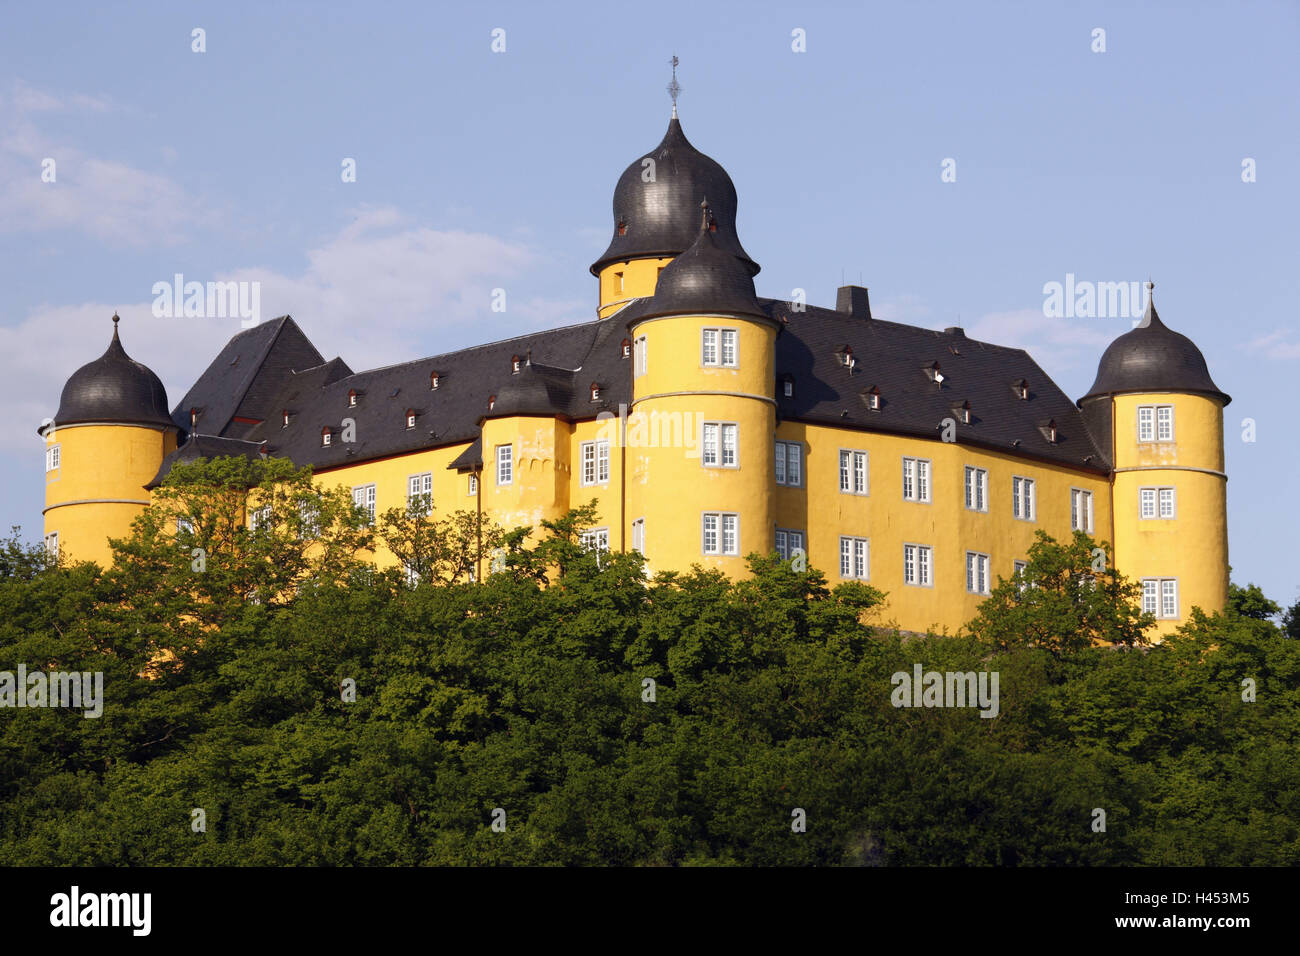 Germany, Rhineland-Palatinate, Montabaur, lock, castle, baroque, architectural style, place of interest, landmark, destination, architecture, trees, summers, outside, tower, castle tower, yellow, Stock Photo